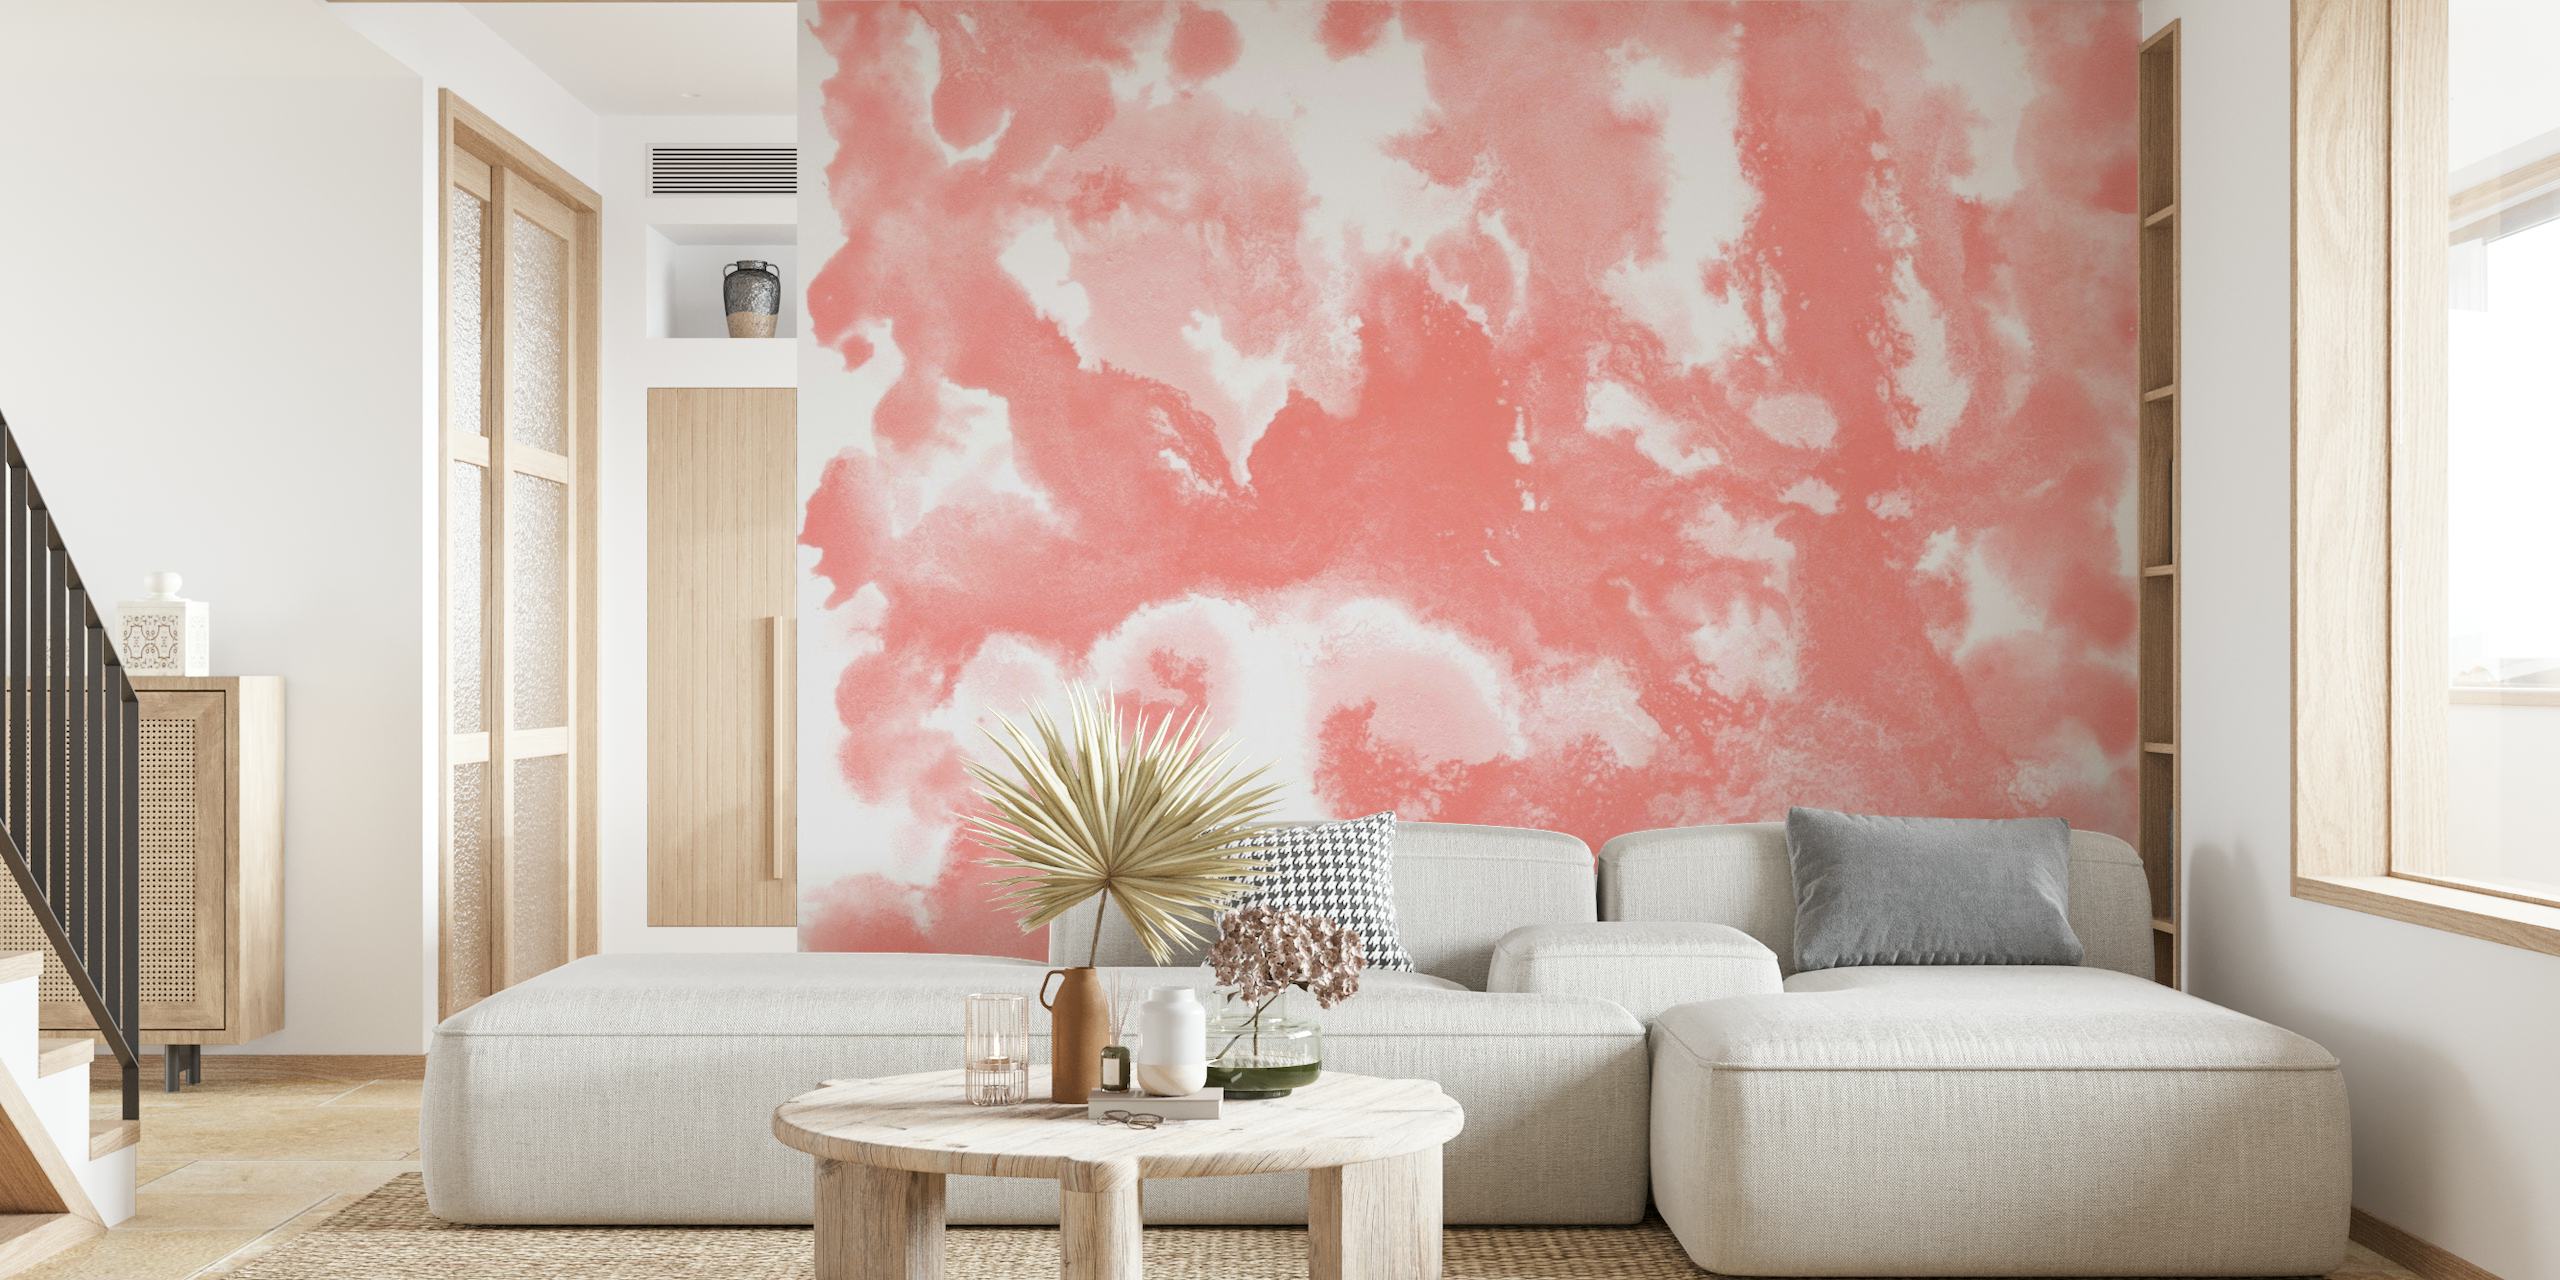 Abstract coral and white wall mural design